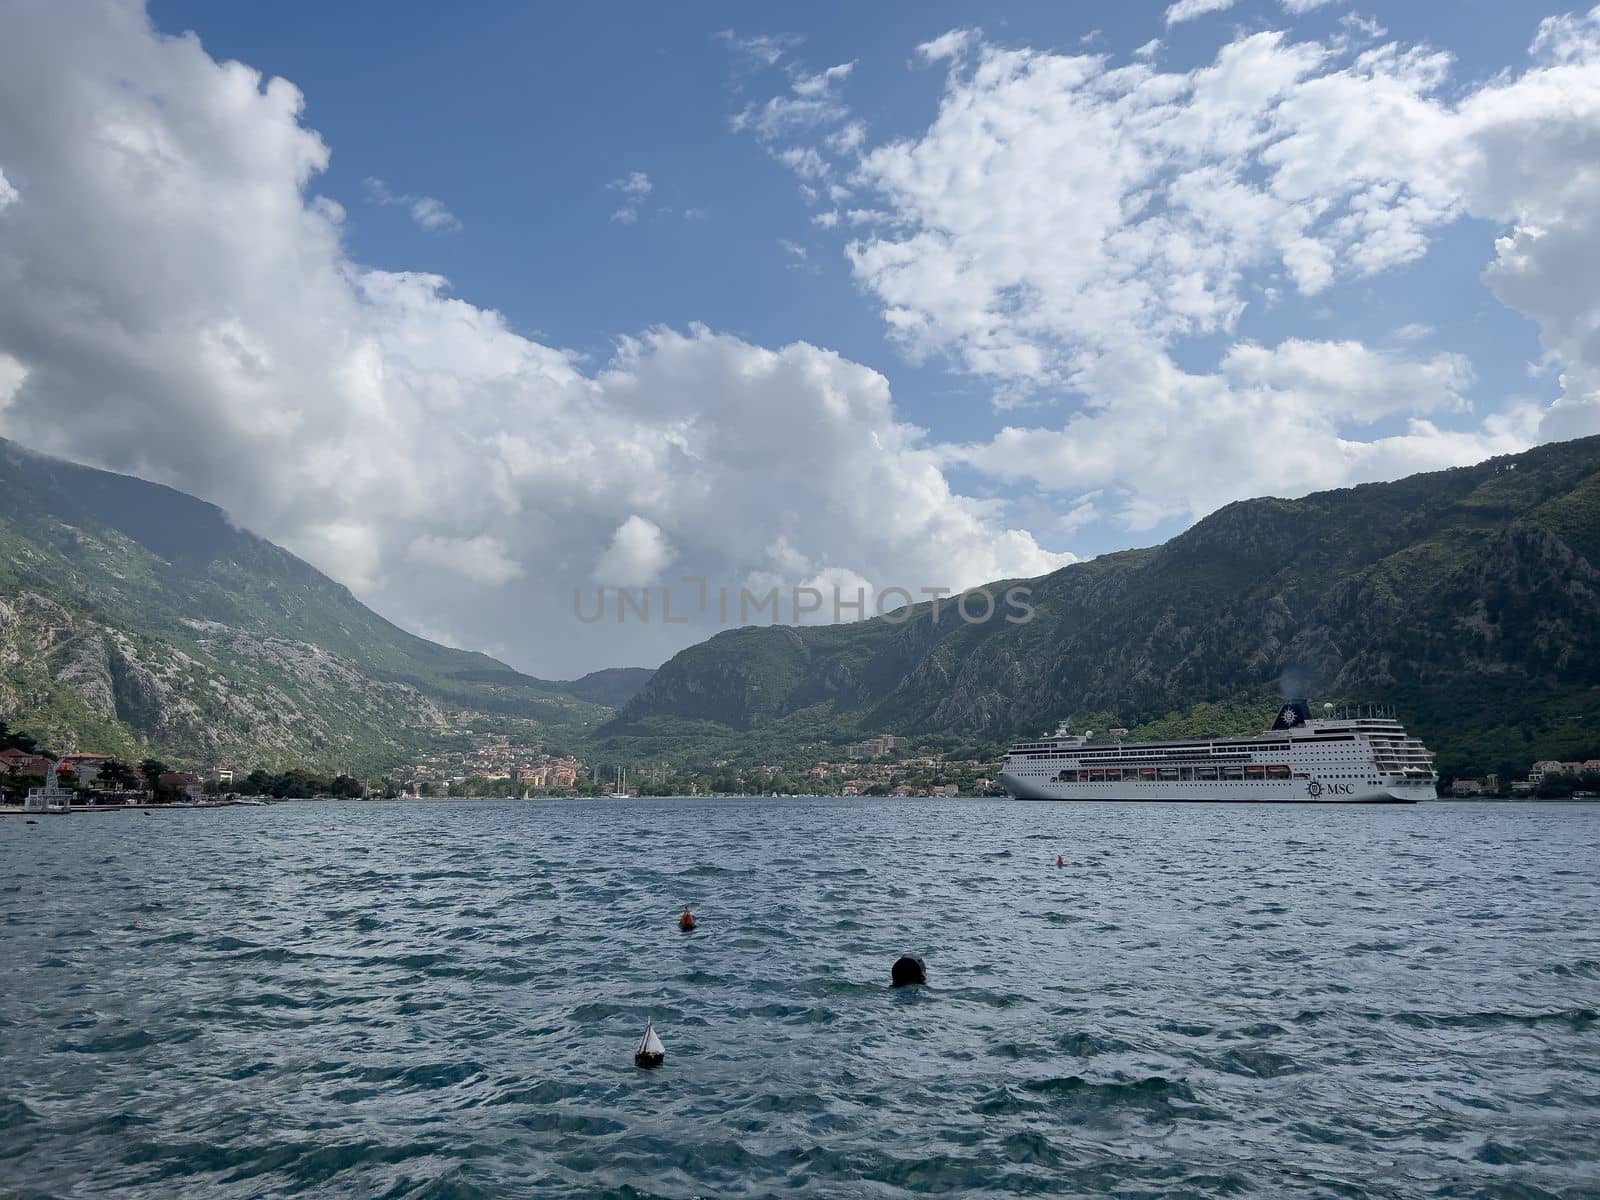 Huge passenger liner floats on the sea against the backdrop of mountains. High quality photo